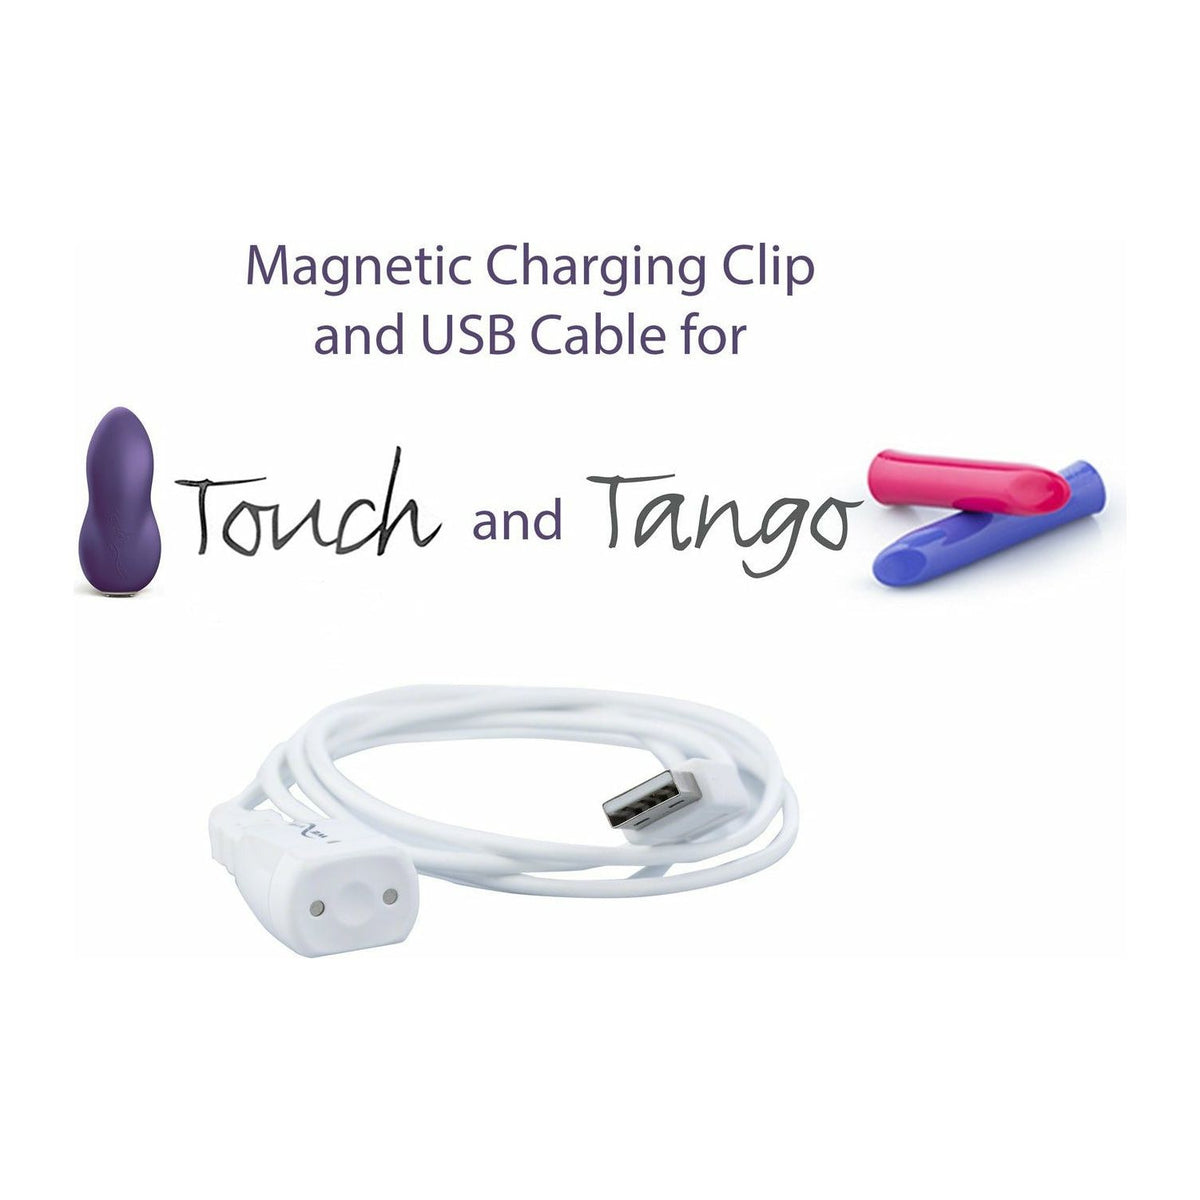 We-Vibe Magnetic Charging Clip USB Cable for We-Vibe Touch and Tango